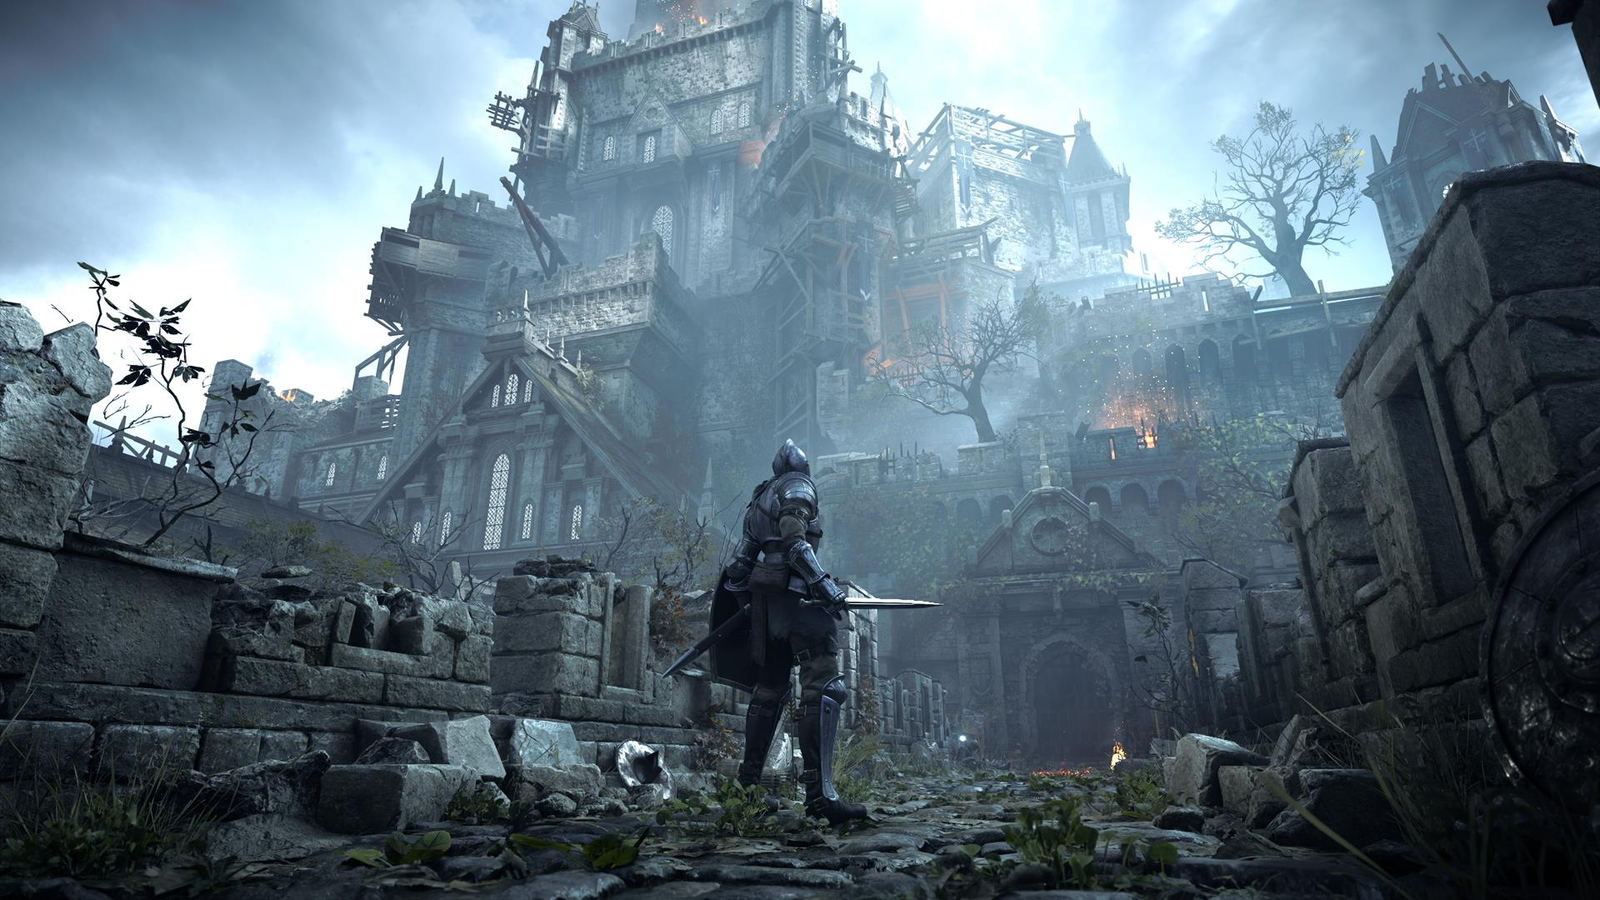 PlayStation Showcase: Was Bloodborne announced for PS5 or PC today?